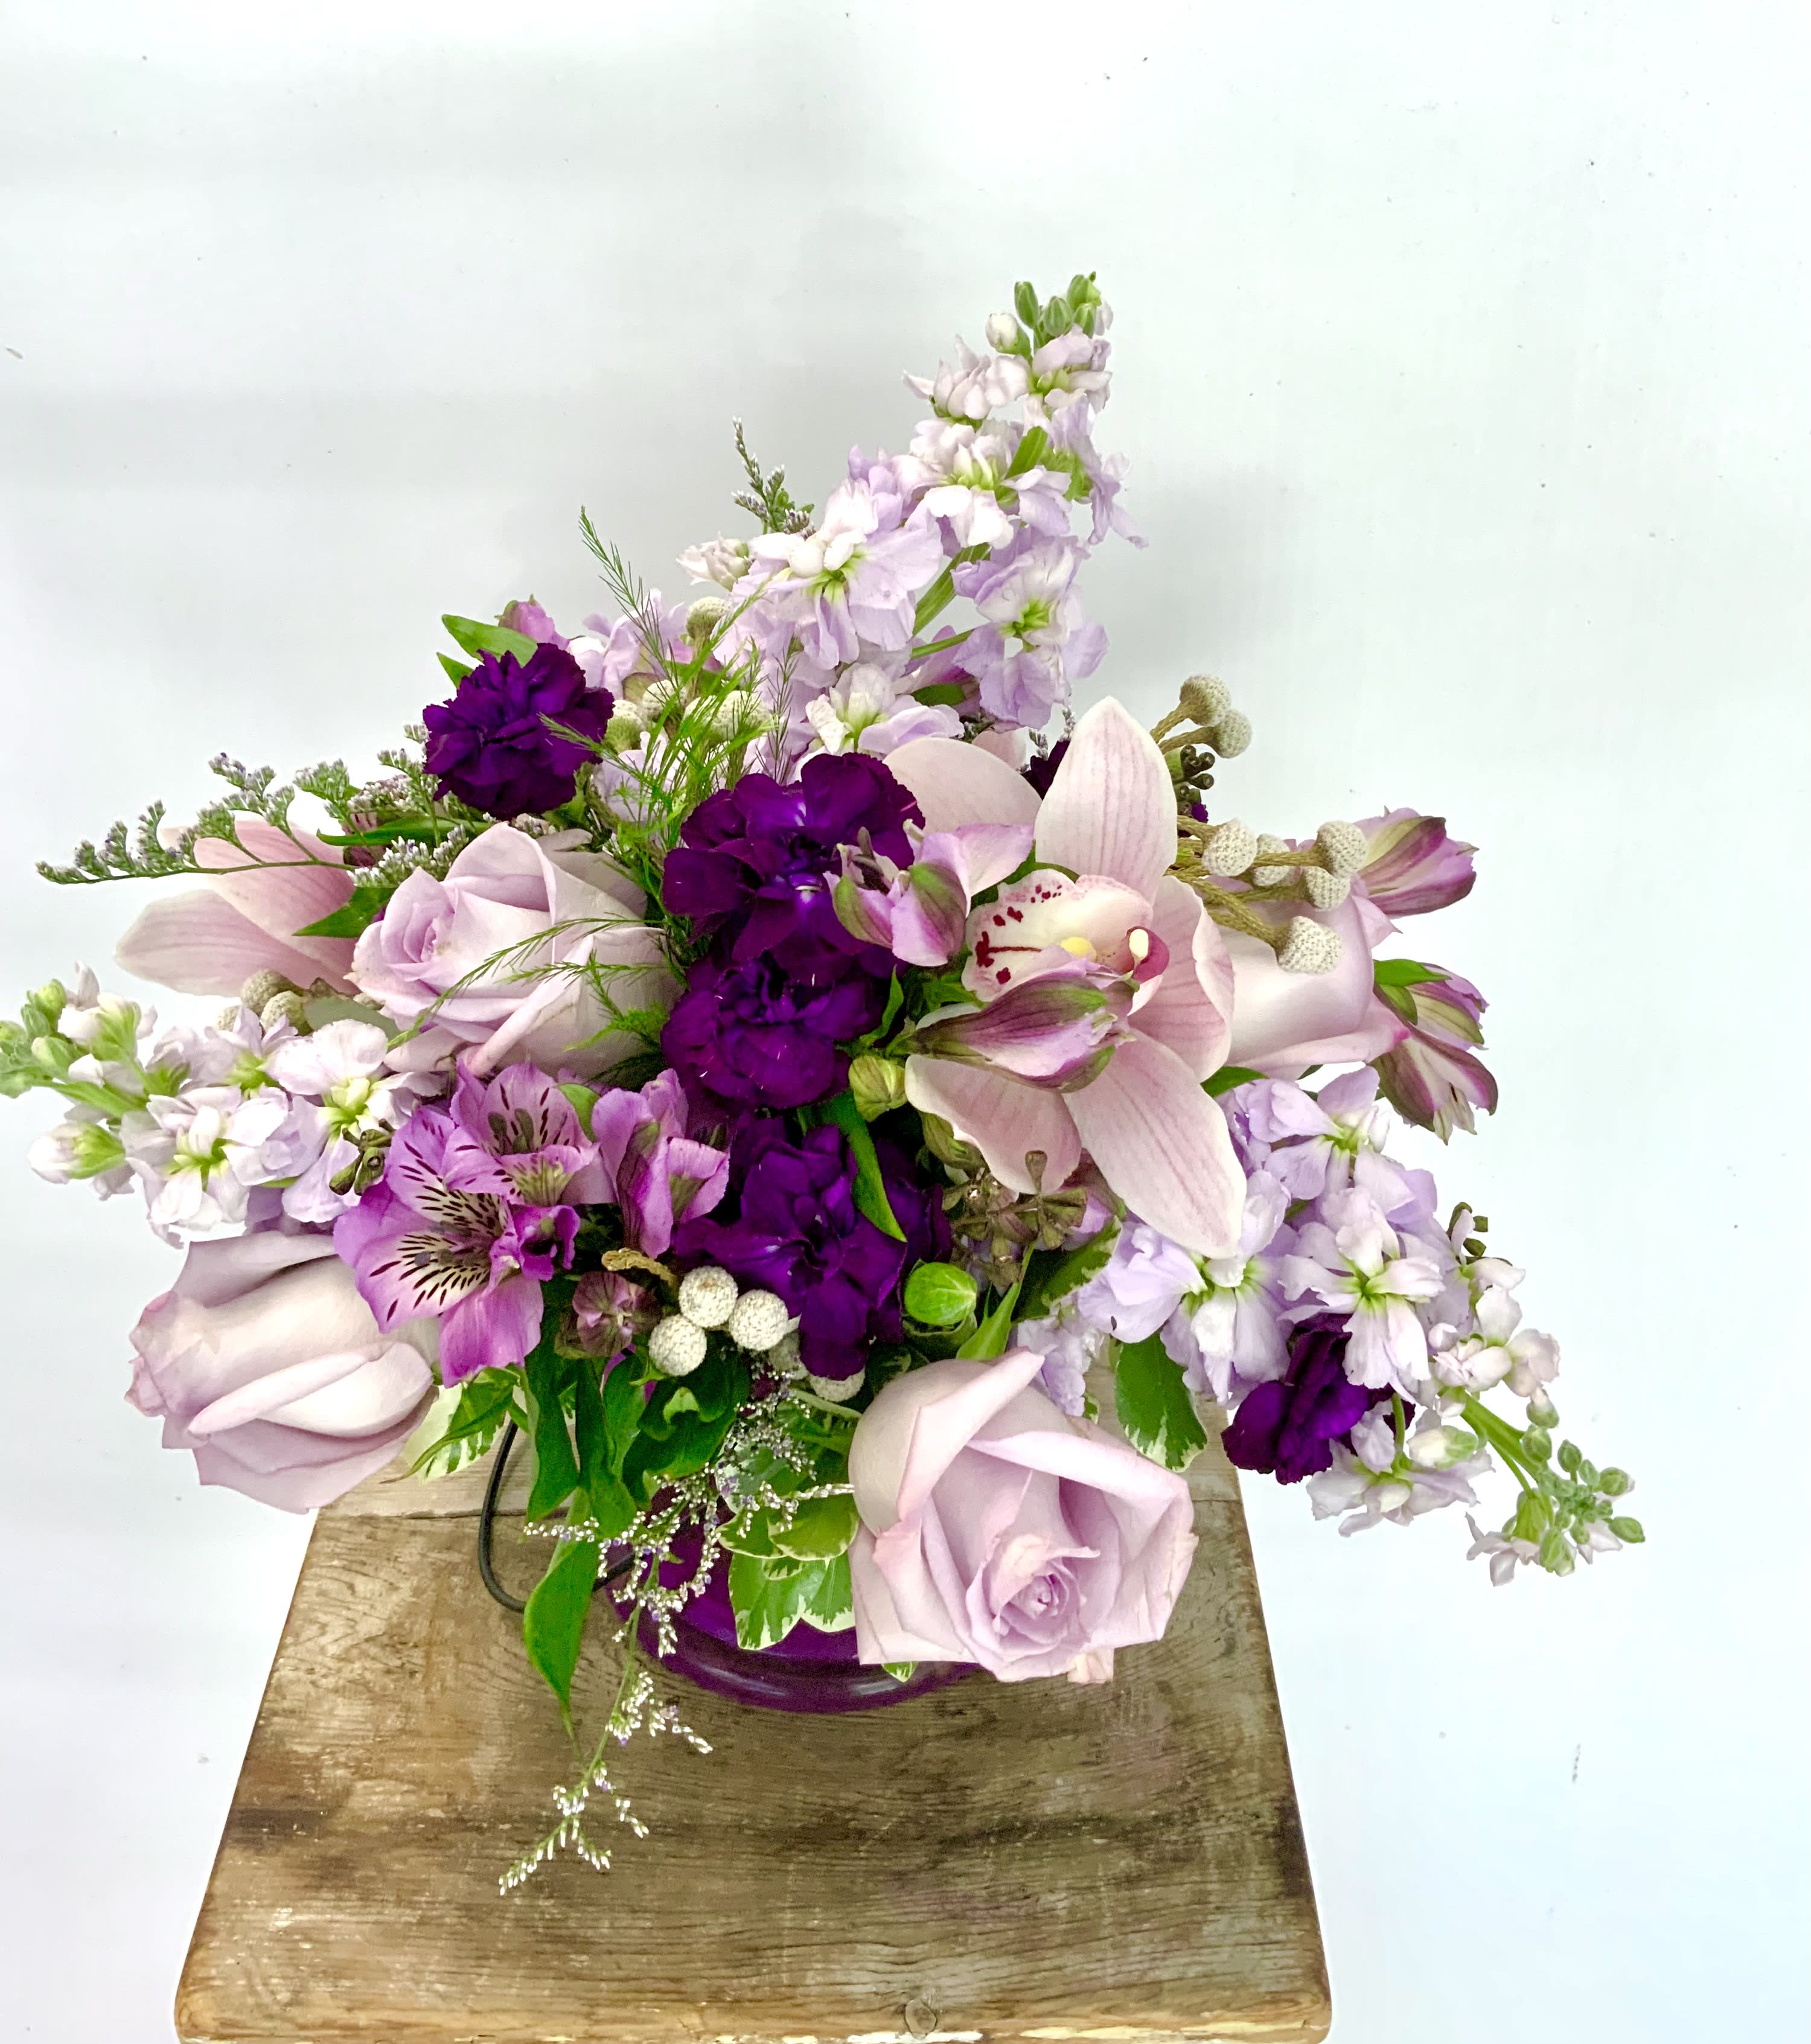 Passionately Purple - Lavender roses, fragrant stock and cymbidium Orchids are the focus of this beautiful glowing gift.